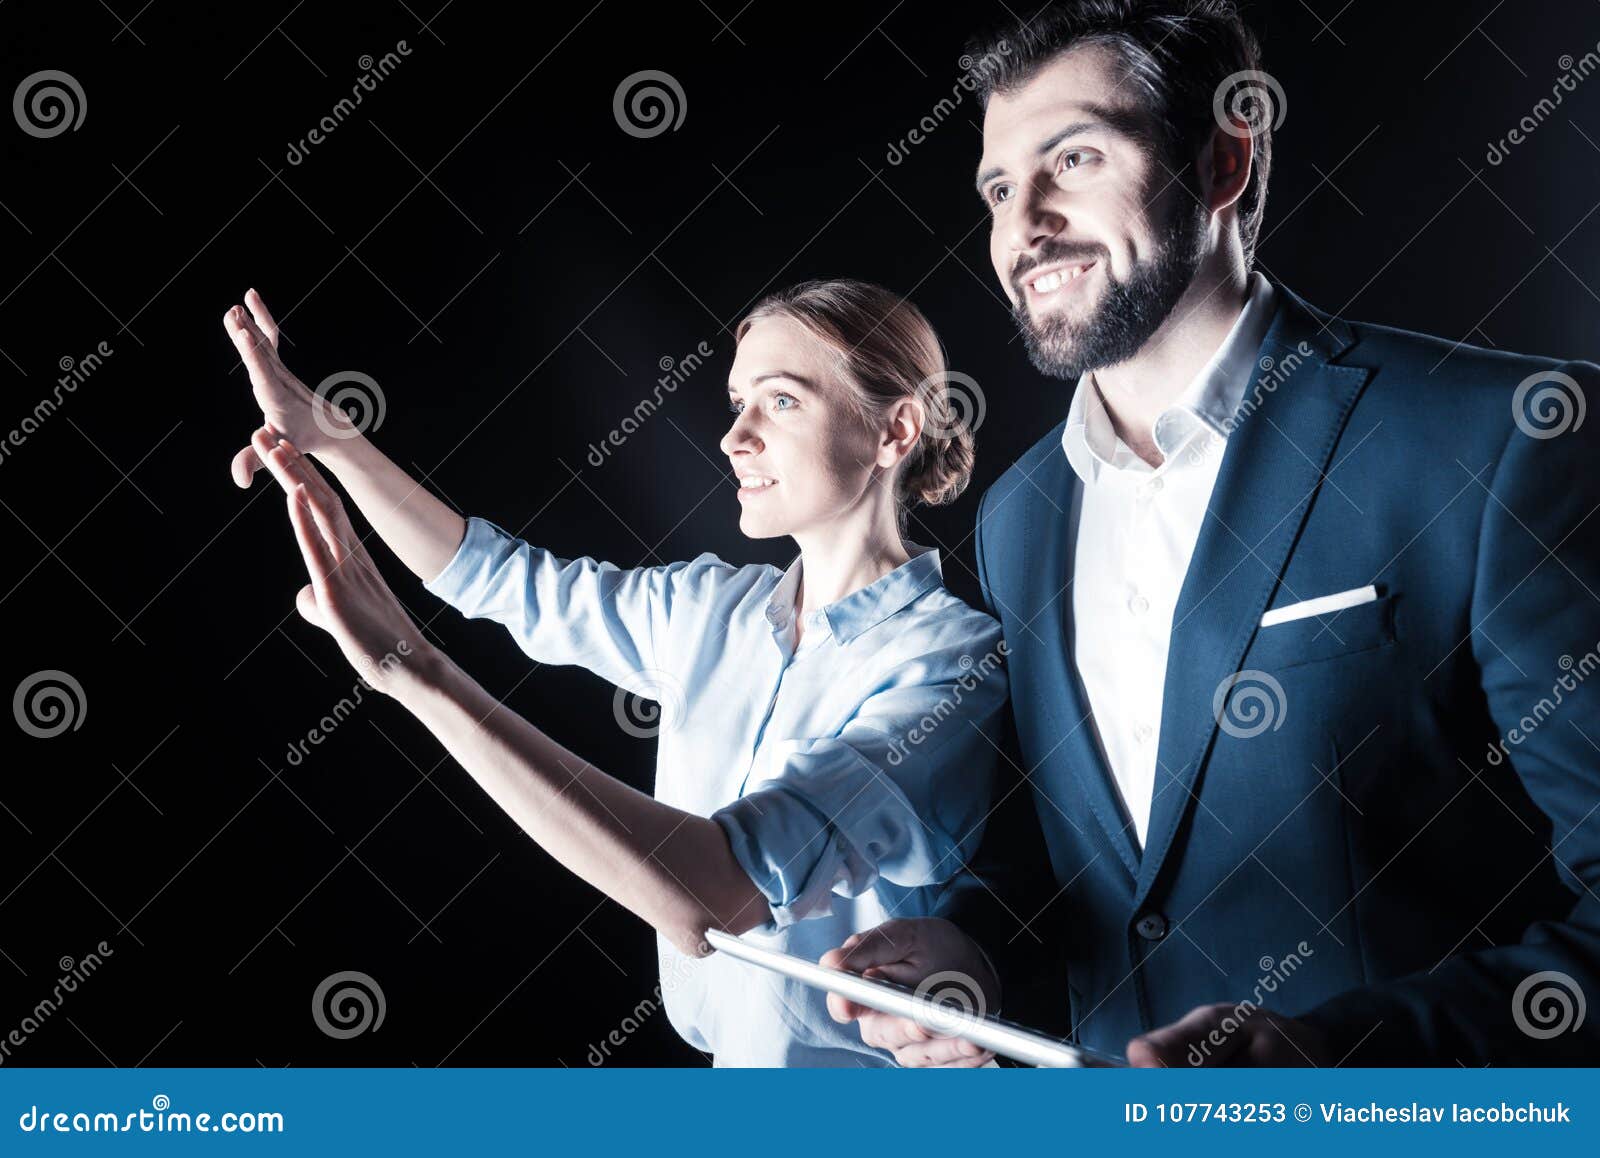 Positive Nice People Looking Into The Future Stock Image